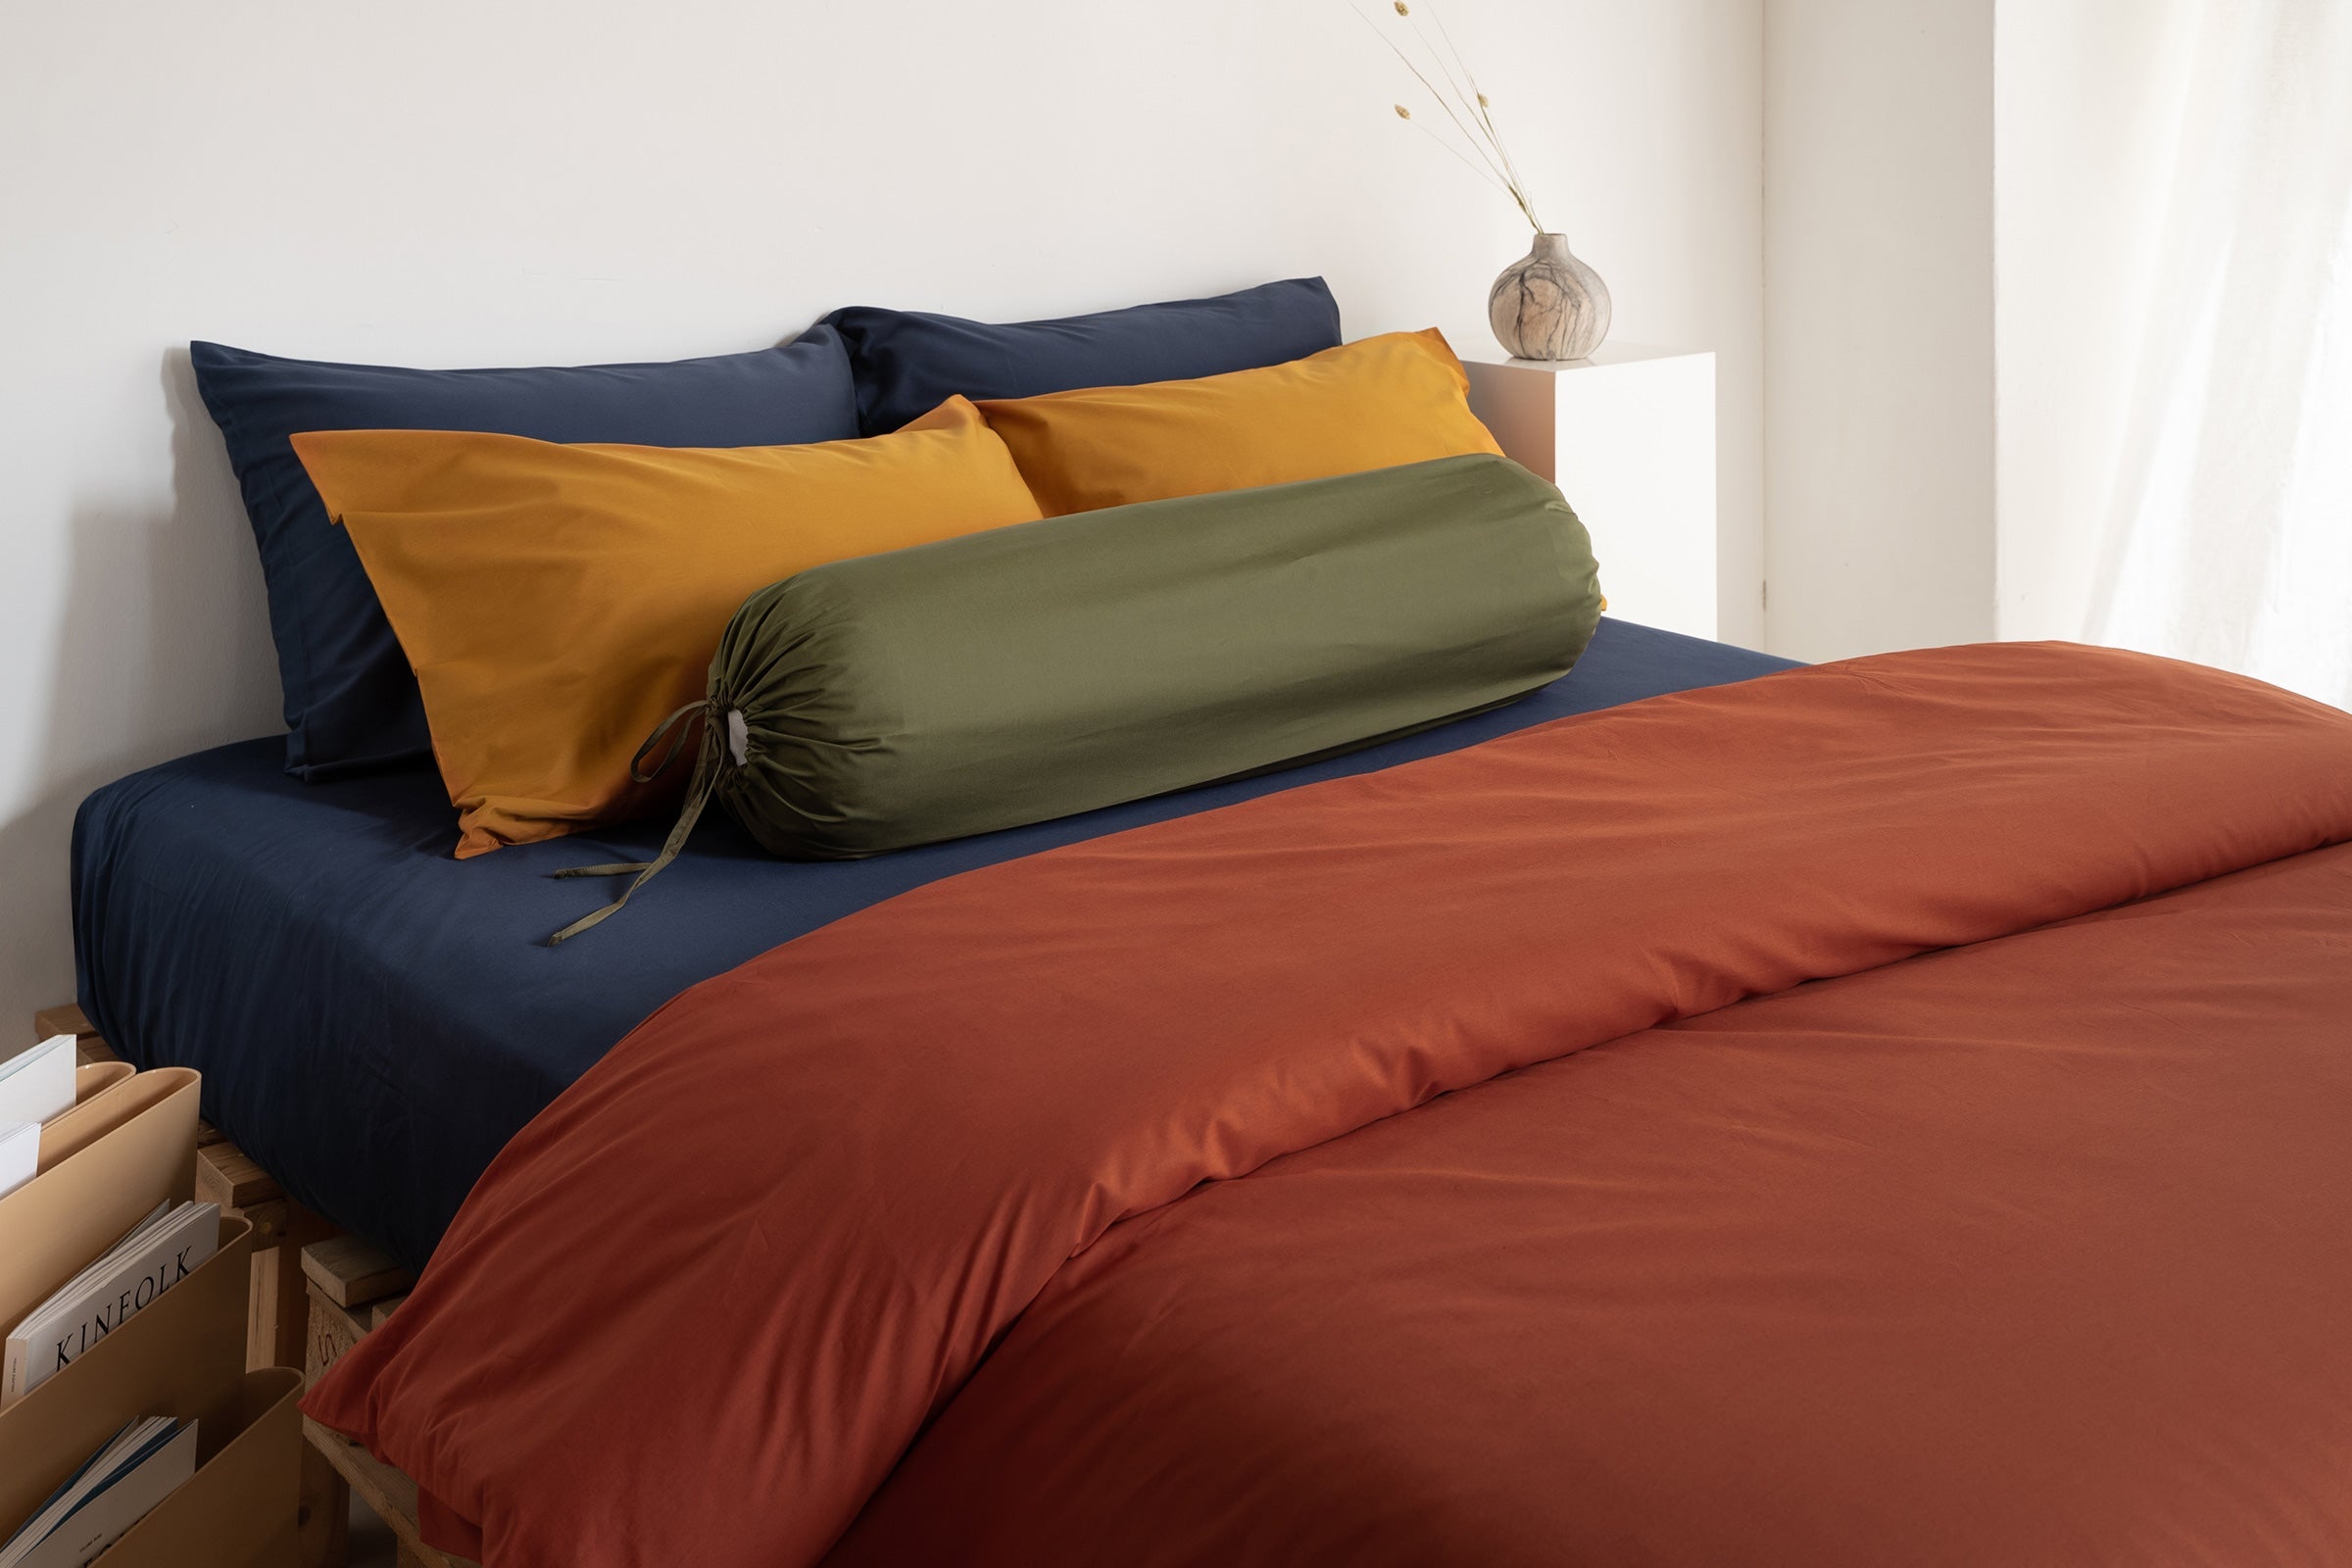 organic-cotton-crisp-bolster-case-in-olive-colour-with-classic-navy-sheet-set-crisp-mustard-pillow-case-pair-and-crisp-clay-duvet-cover-by-sojao